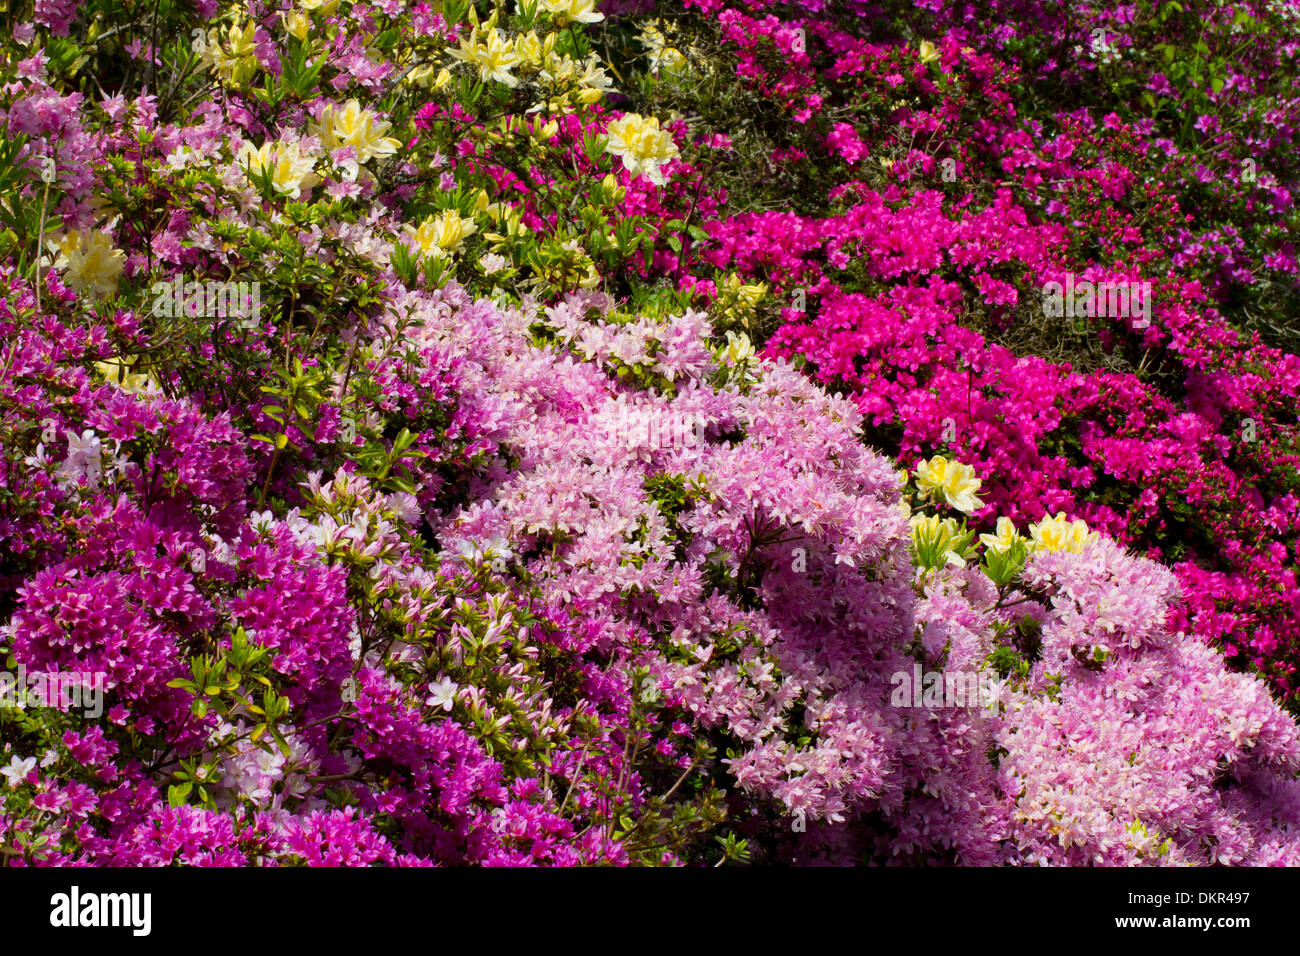 Cultivated hybrids of Azaleas and Rhododendrons flowering in a garden. Herefordshire, England. May. Stock Photo